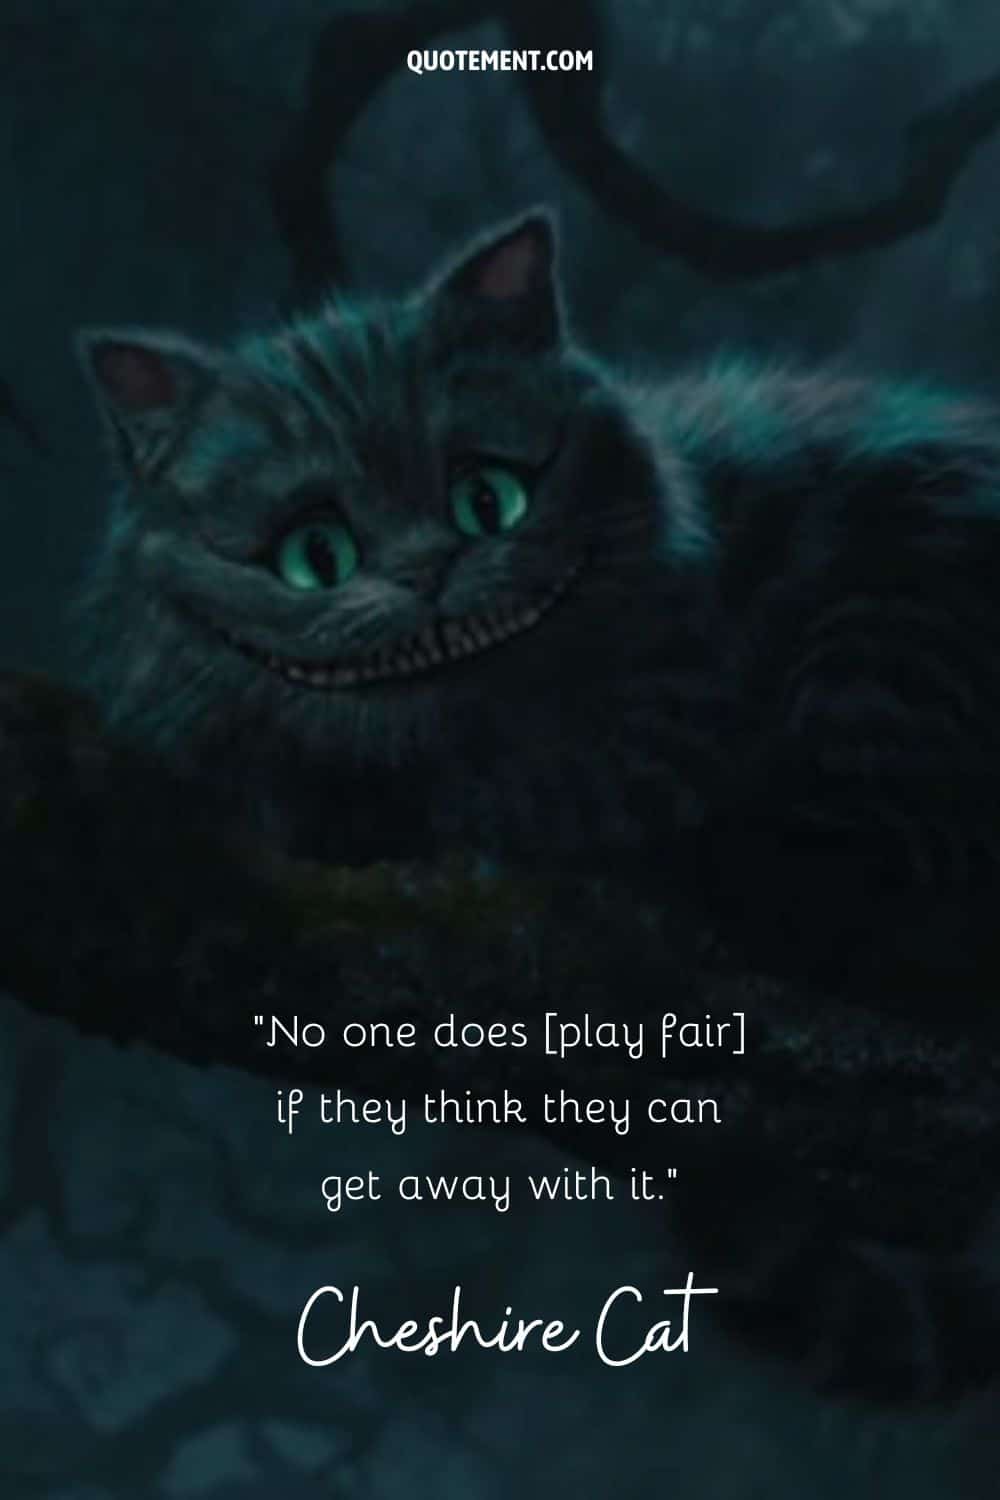 Wise quote by the Cheshire Cat and its image in the background, too